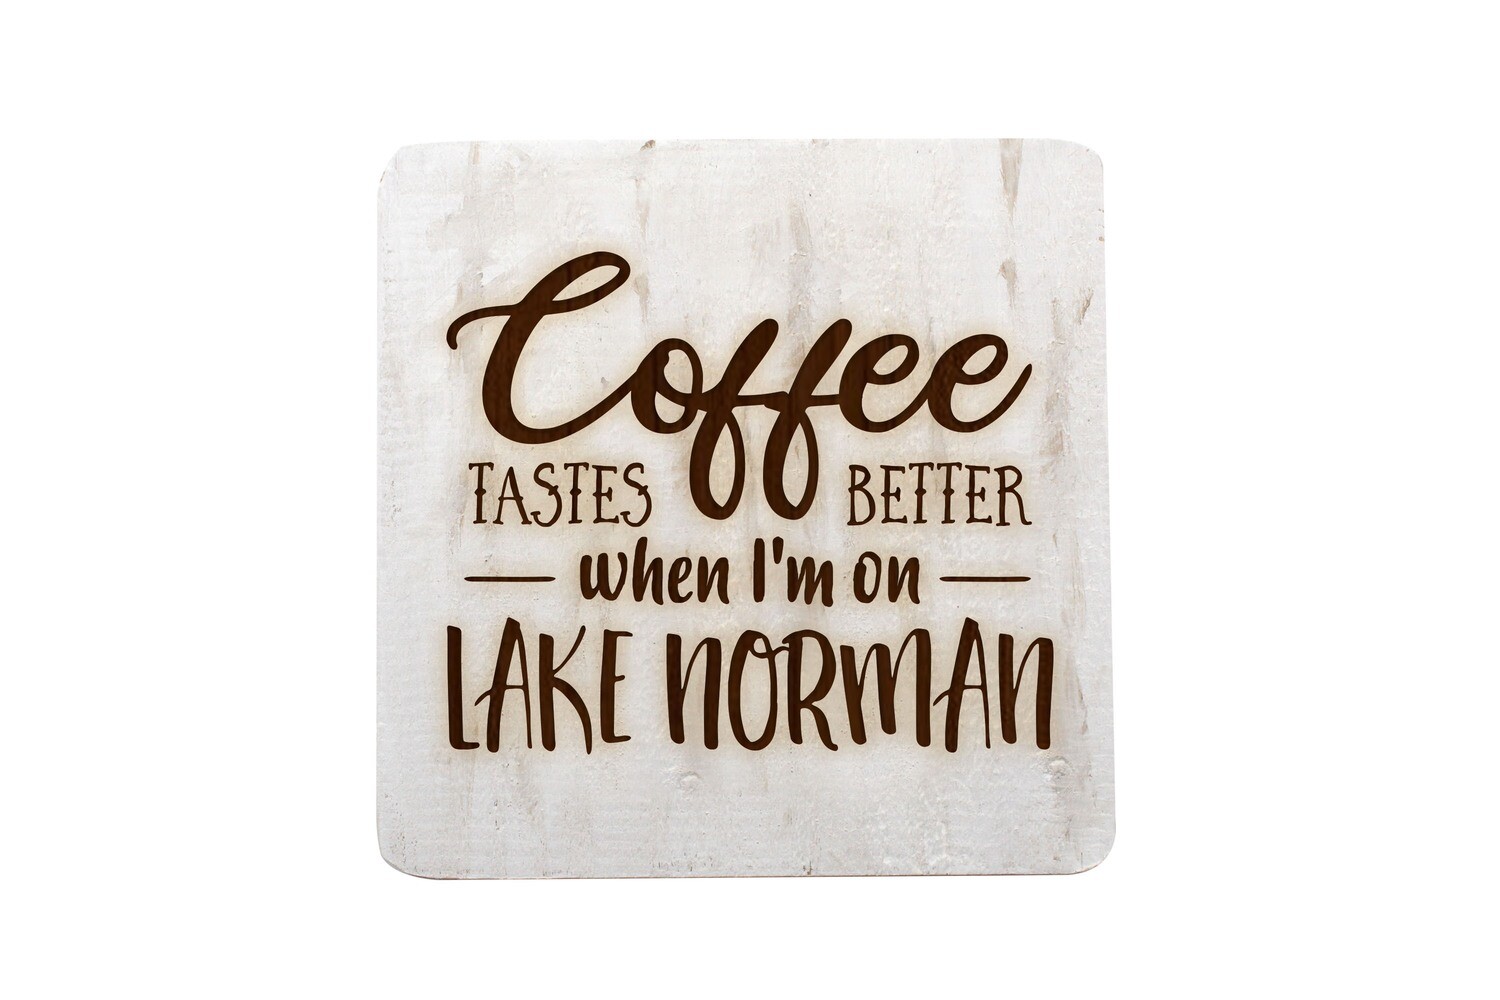 Coffee Tastes better with Customized Location Hand-Painted Wood Coaster Set